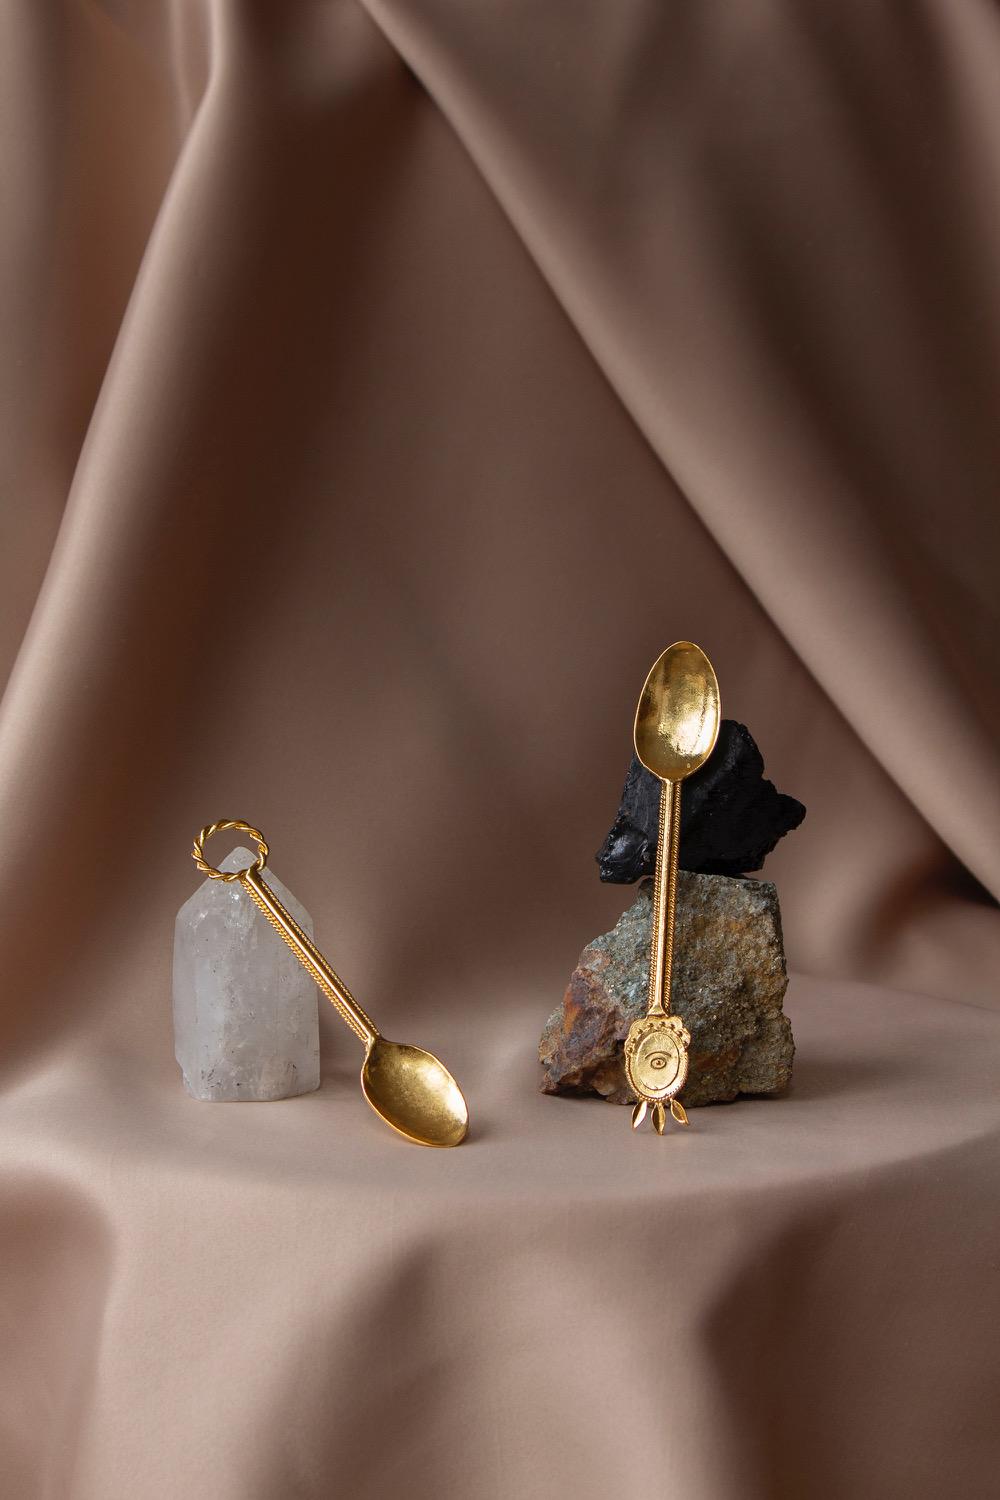 Italian Contemporary Tea Spoons Golden Plated Set Handcrafted in Italy by Natalia Criado For Sale